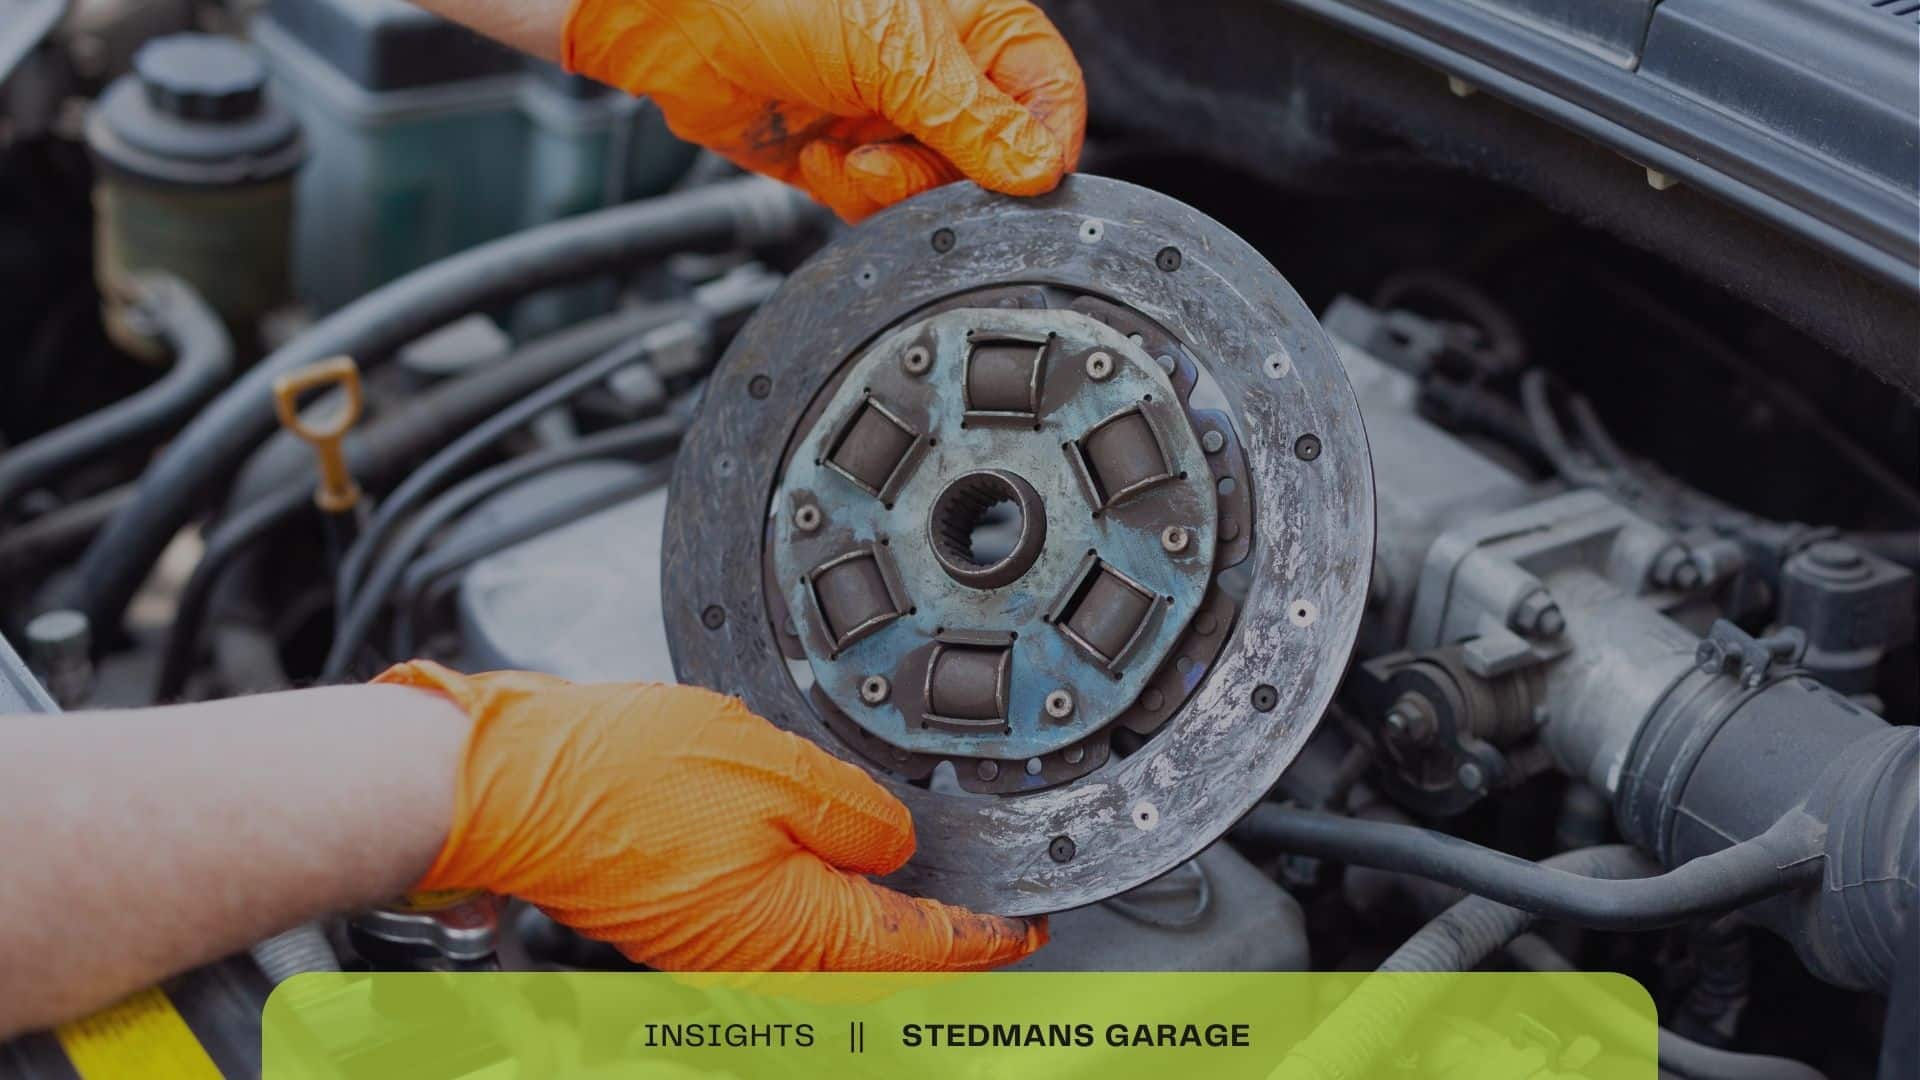 Explore the common clutch failure issues in the Mini Cooper (2001-2006), including repair options, causes, symptoms, and maintenance tips. Learn how to keep your Mini Cooper's clutch in top condition and avoid common repair mistakes.